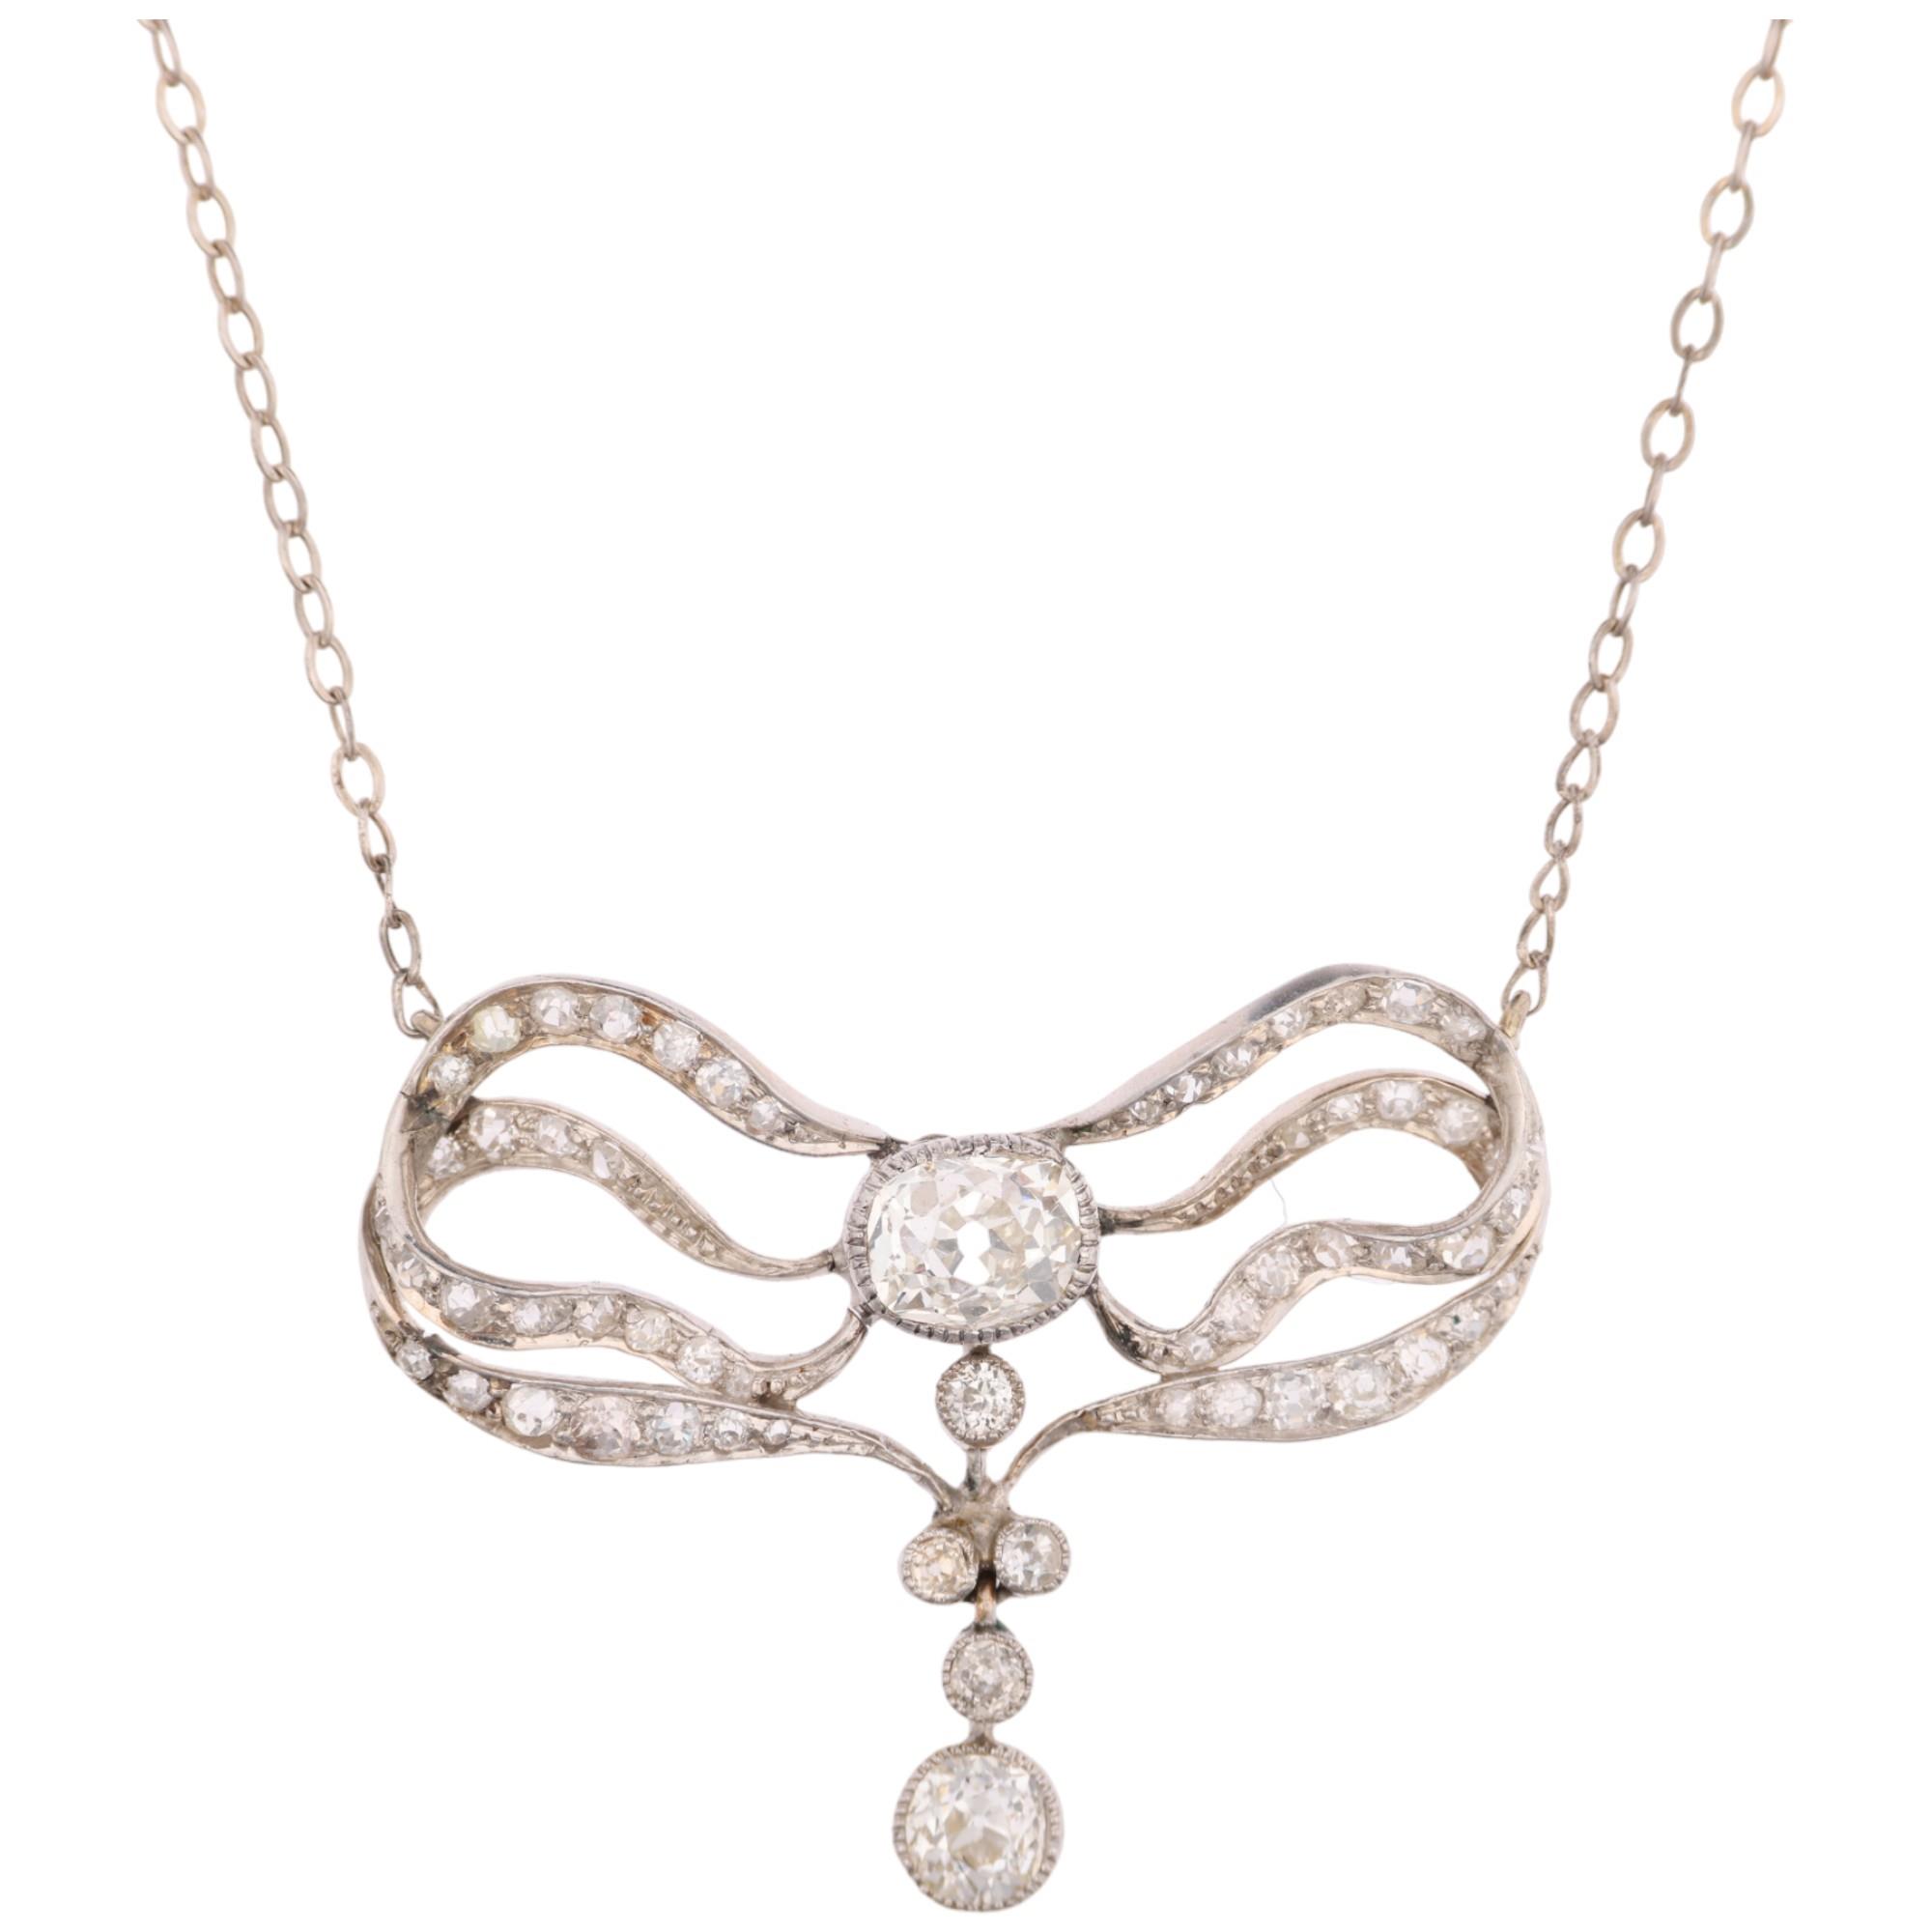 An Art Nouveau French diamond ribbon bow pendant necklace, circa 1910, set with old and eight-cut